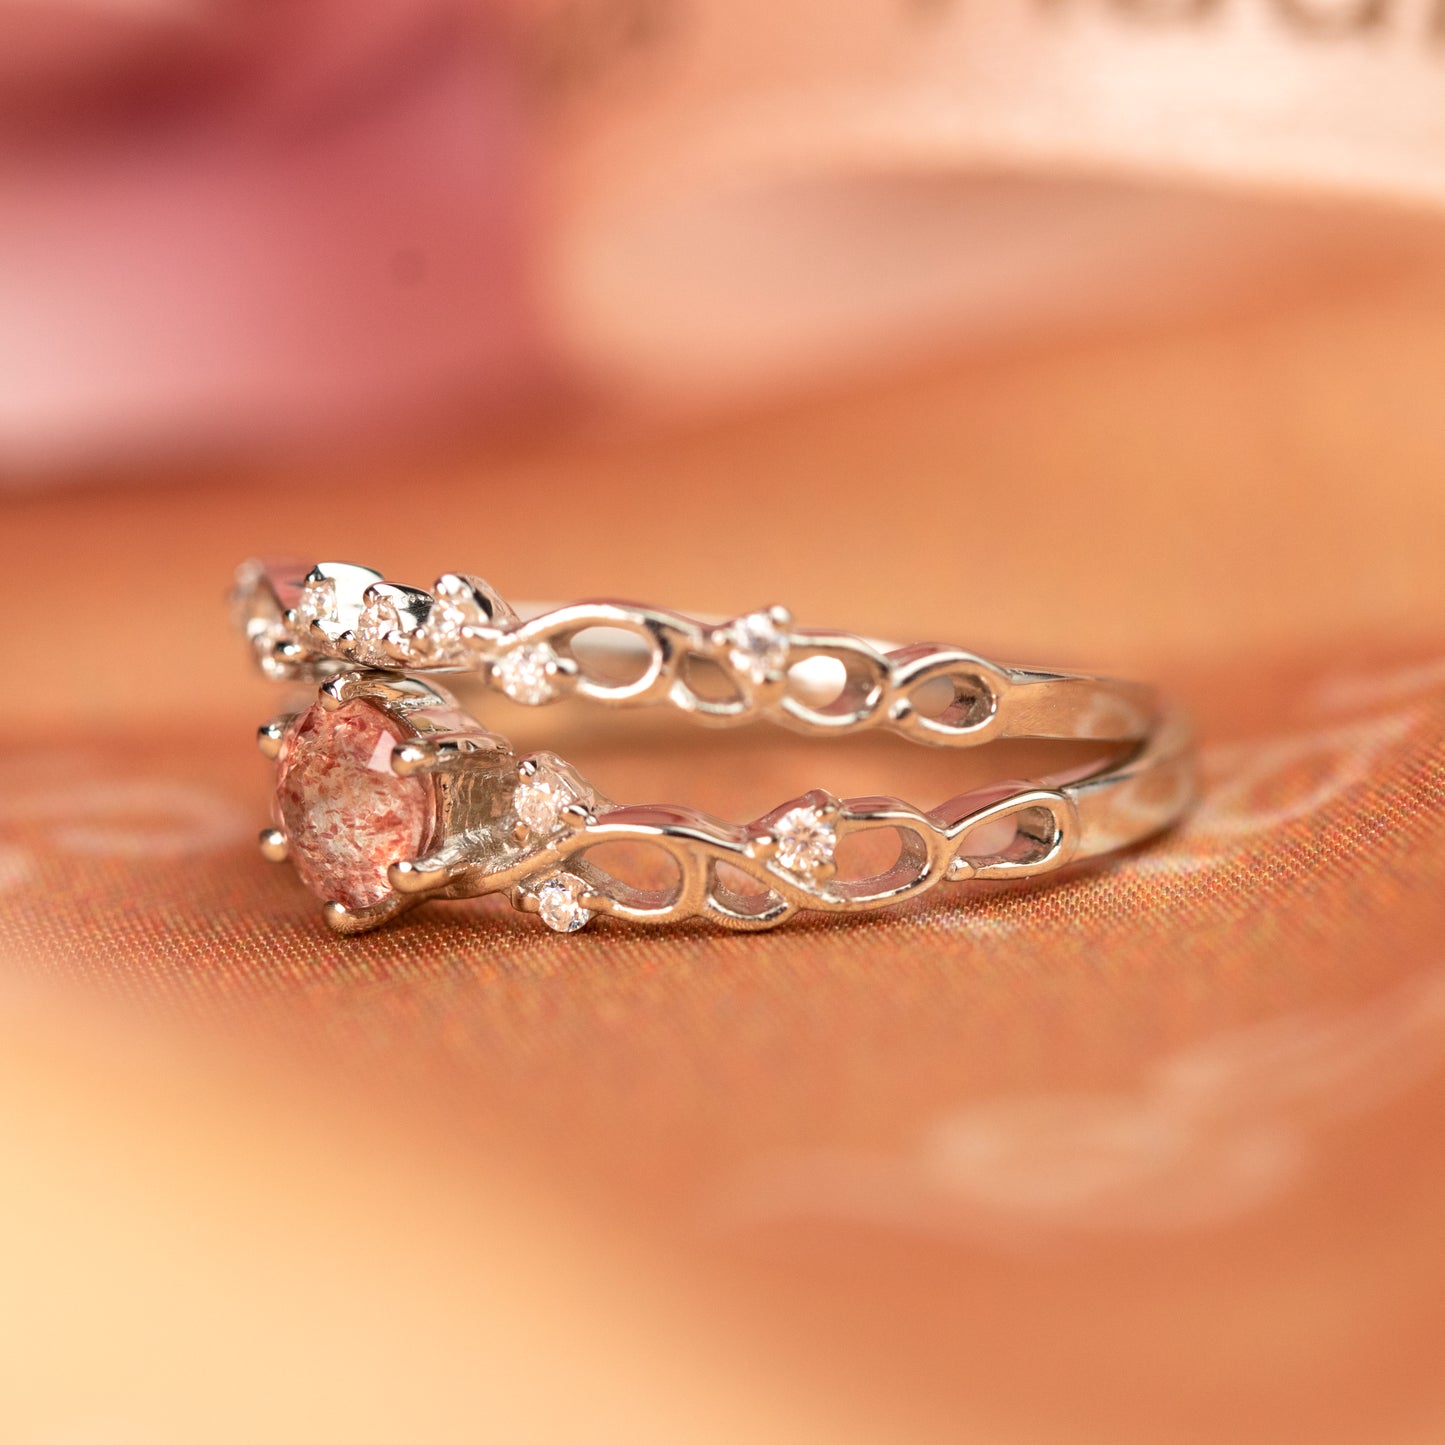 Vintage-inspired 0.7 carat Round Shaped Strawberry Quartz and Diamond Accent Delicate Female Wedding Ring Set in White Gold